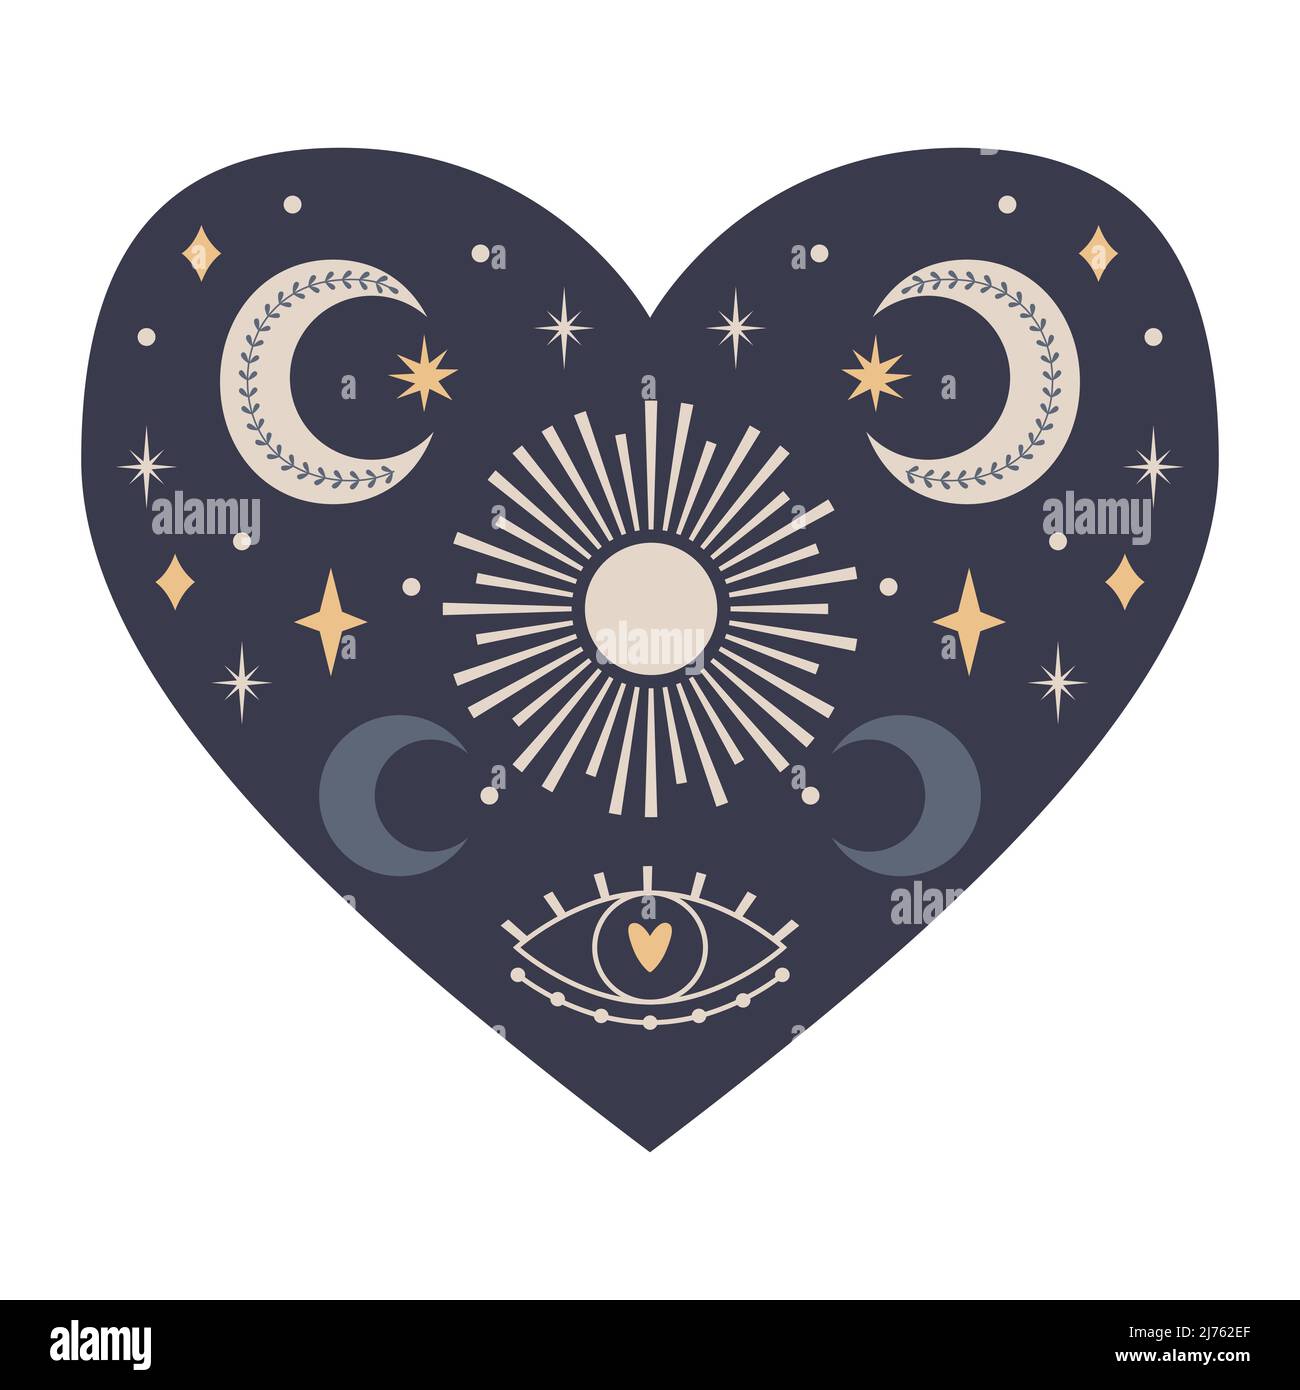 Symmetrical Mystical Heart with celestial and boho elements, moon, sun, stars, eye. Decorative element for Valentine's day cards, packaging design. Co Stock Vector